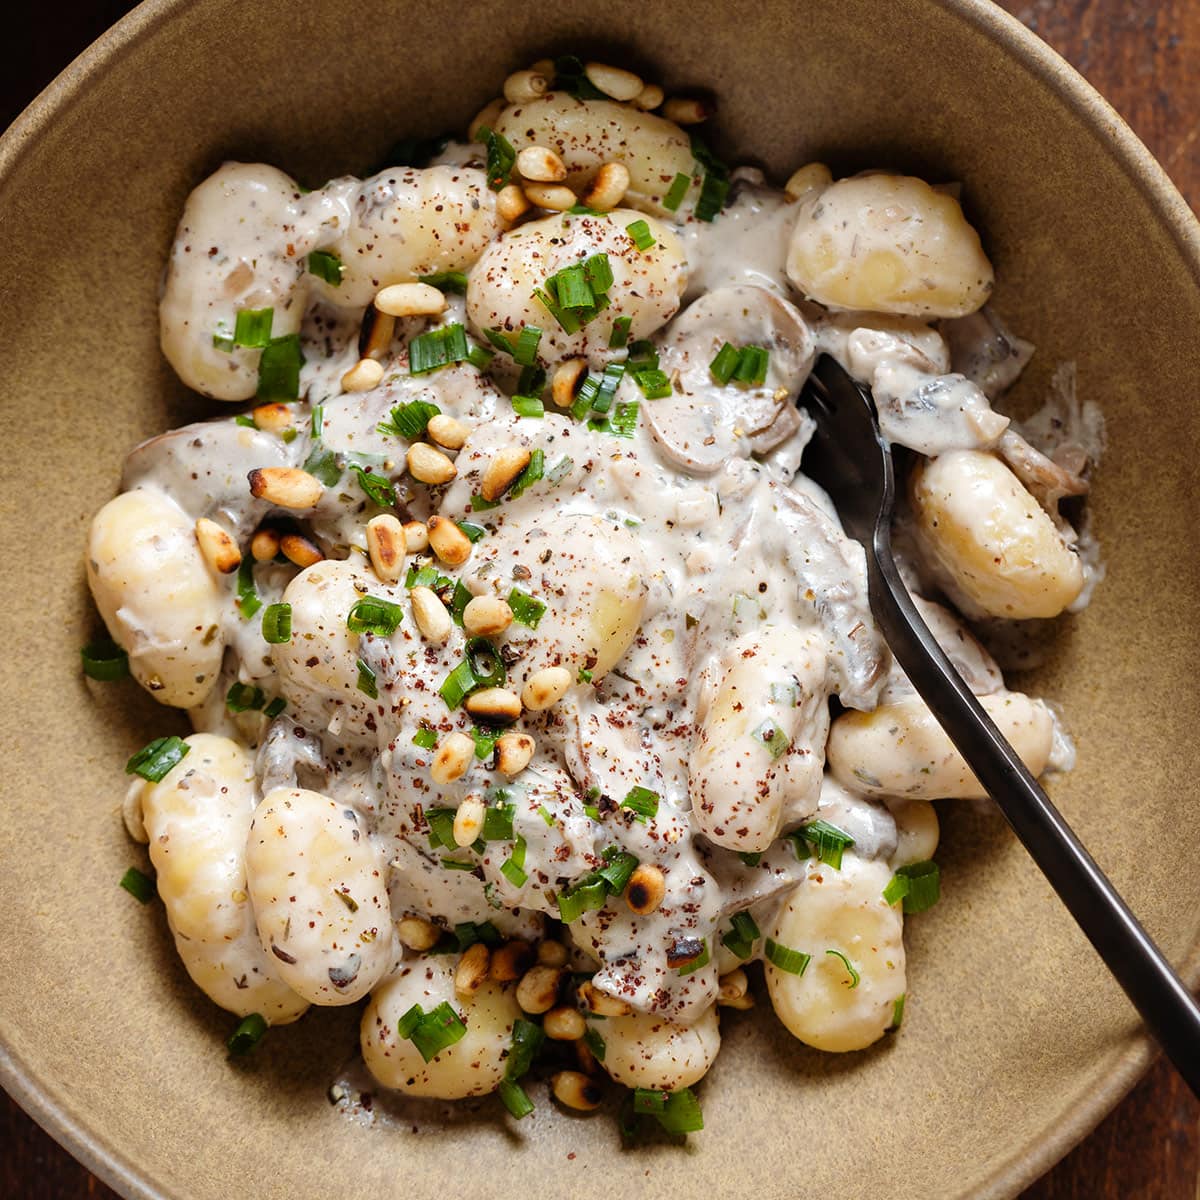 Creamy gnocchi with mushroom in a low brown bowl topped with toasted pine nuts, chives, and sumac with a black fork on the right side of the bowl.